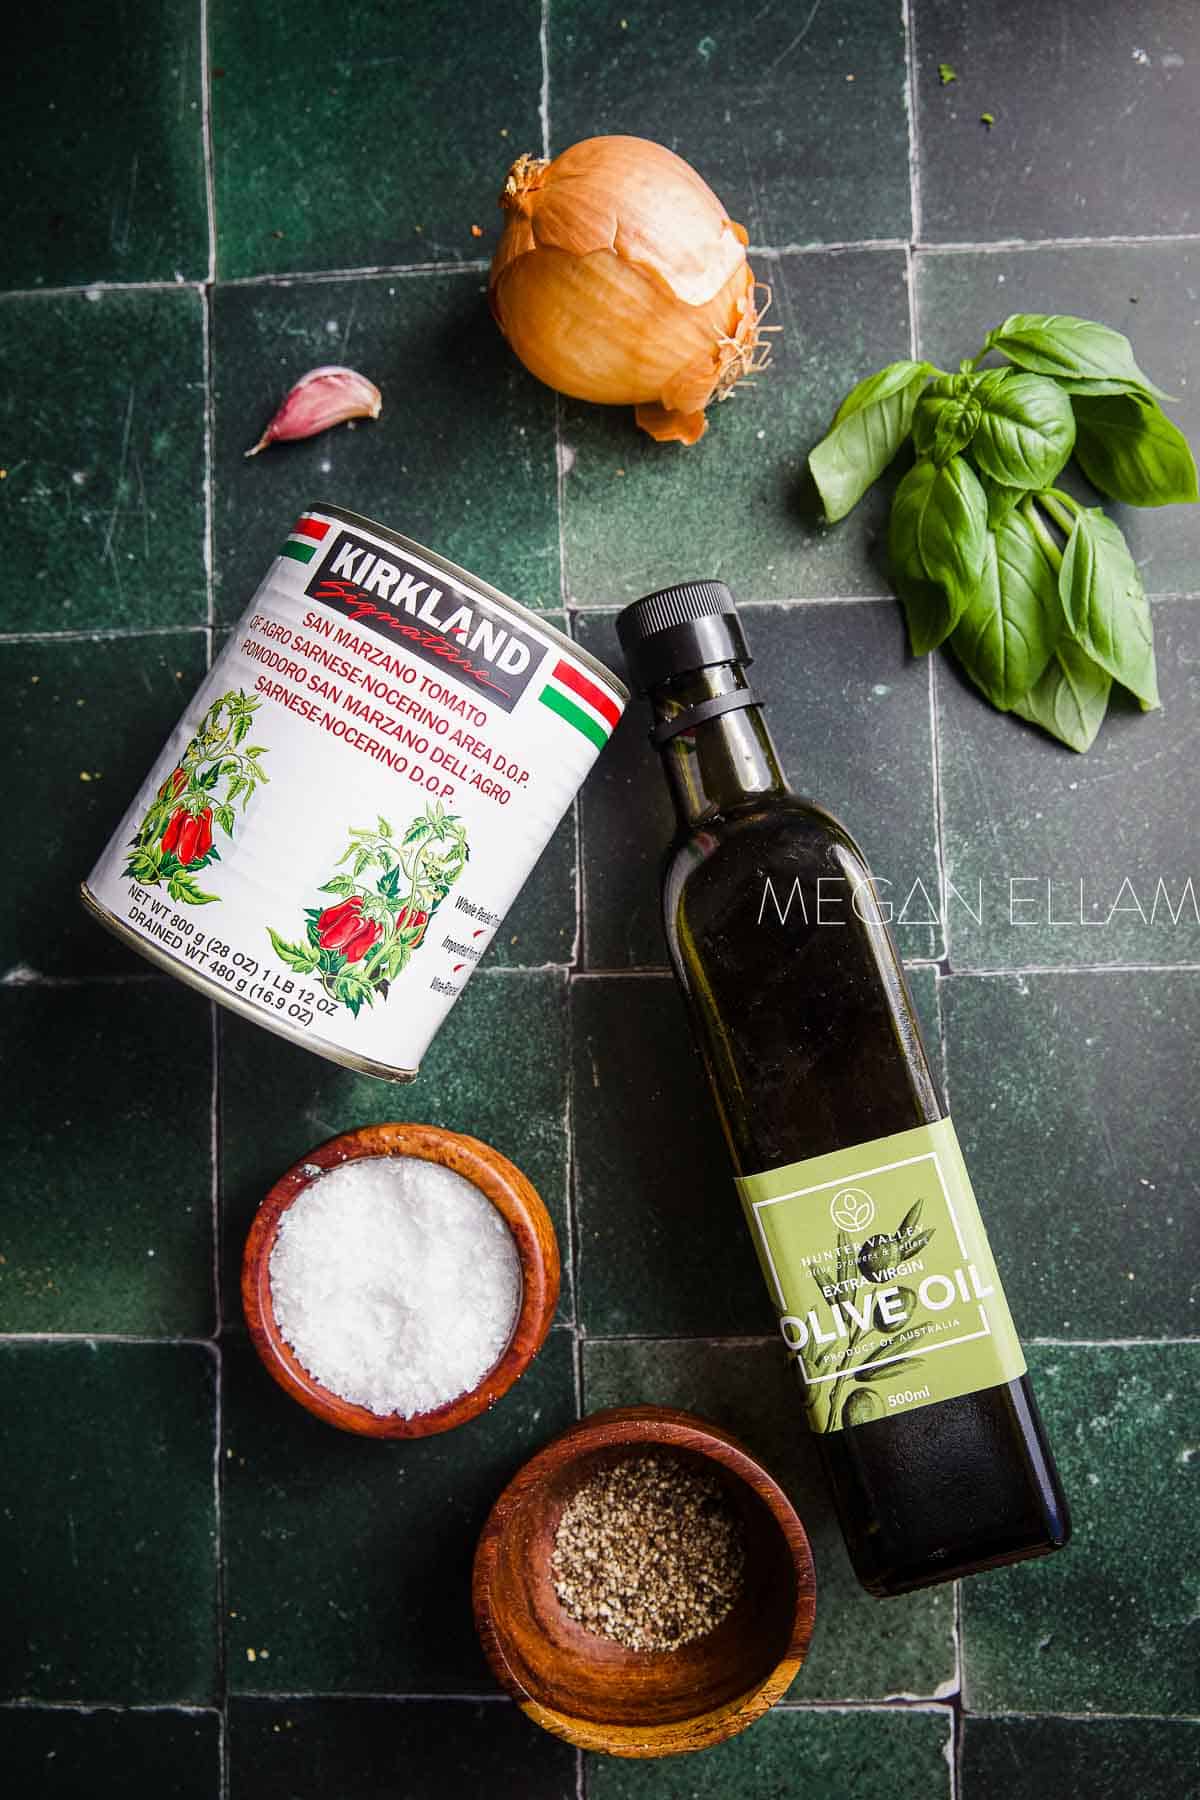 Ingredients for Napoli sauce on green tiles.